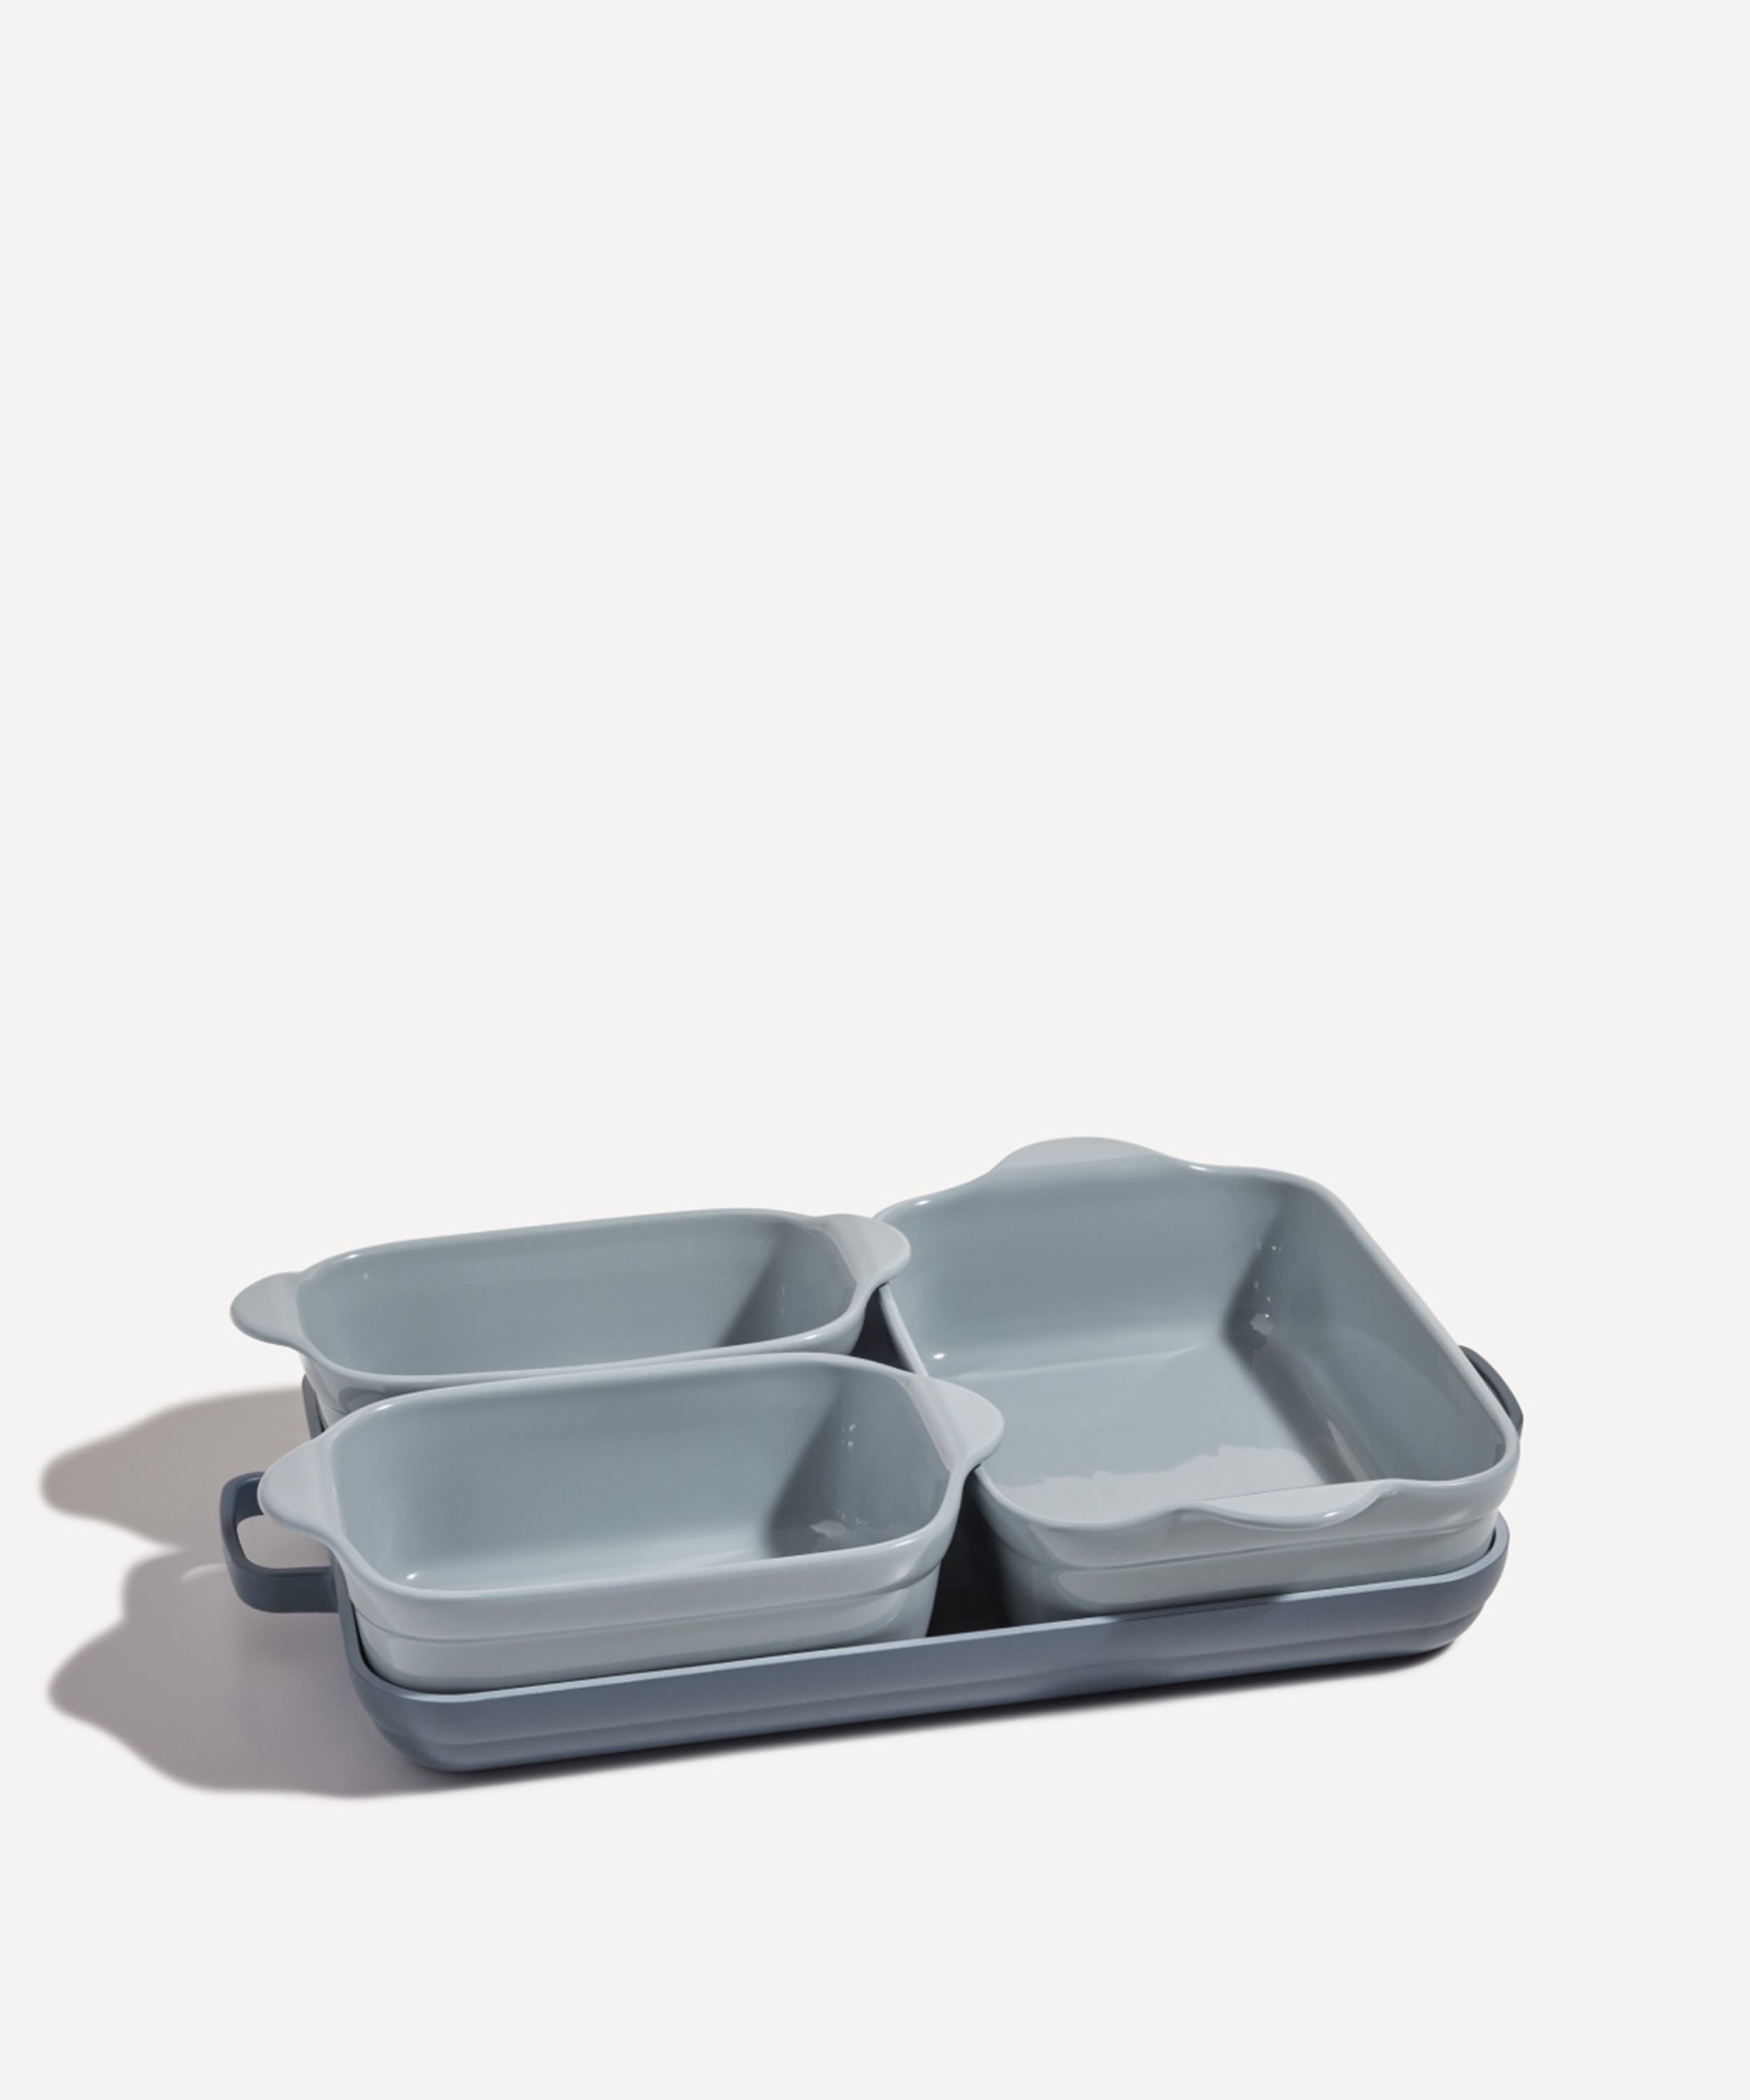 Glass Bakeware Sets - Liberty Tabletop - Bakeware Made in USA